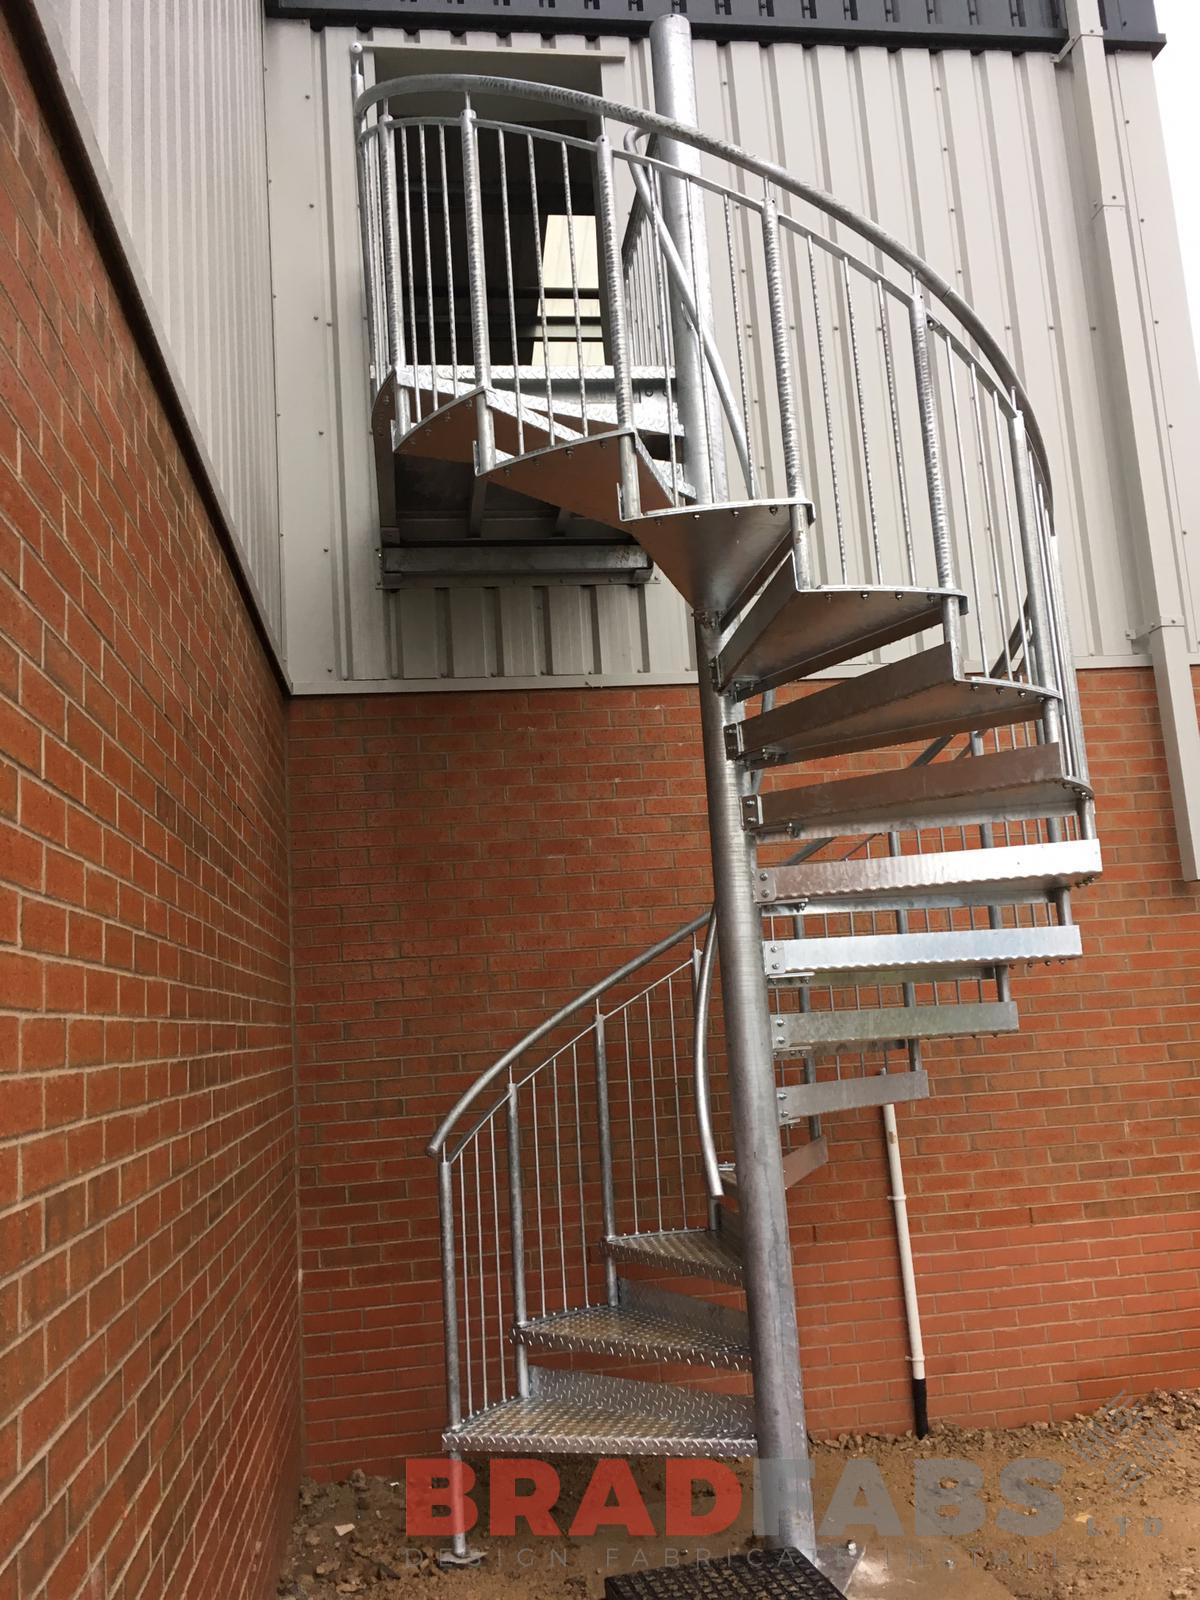 Bespoke spiral fire exit stair by Bradfabs Ltd, mild steel and galvanised, vertical bar balustrade and tubular toprail, complete with durbar treads 